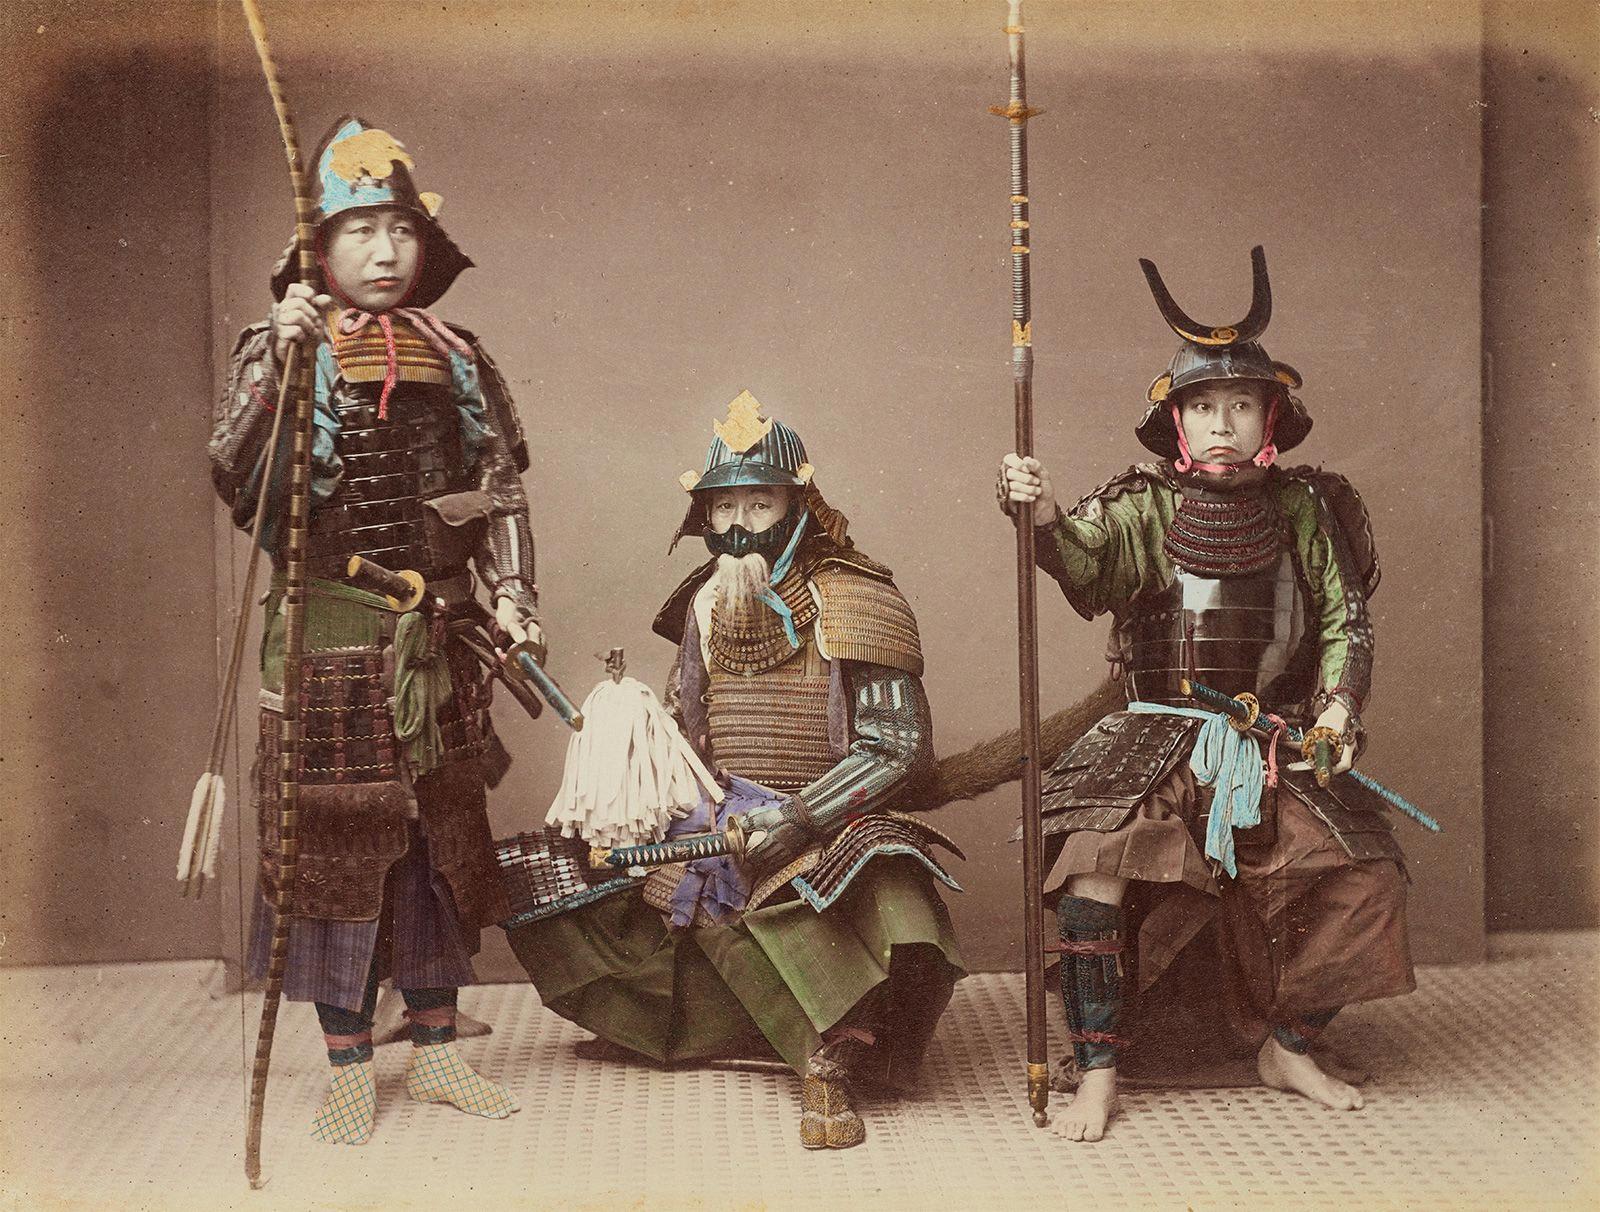 The Chinese Roots of the Samurai Warrior